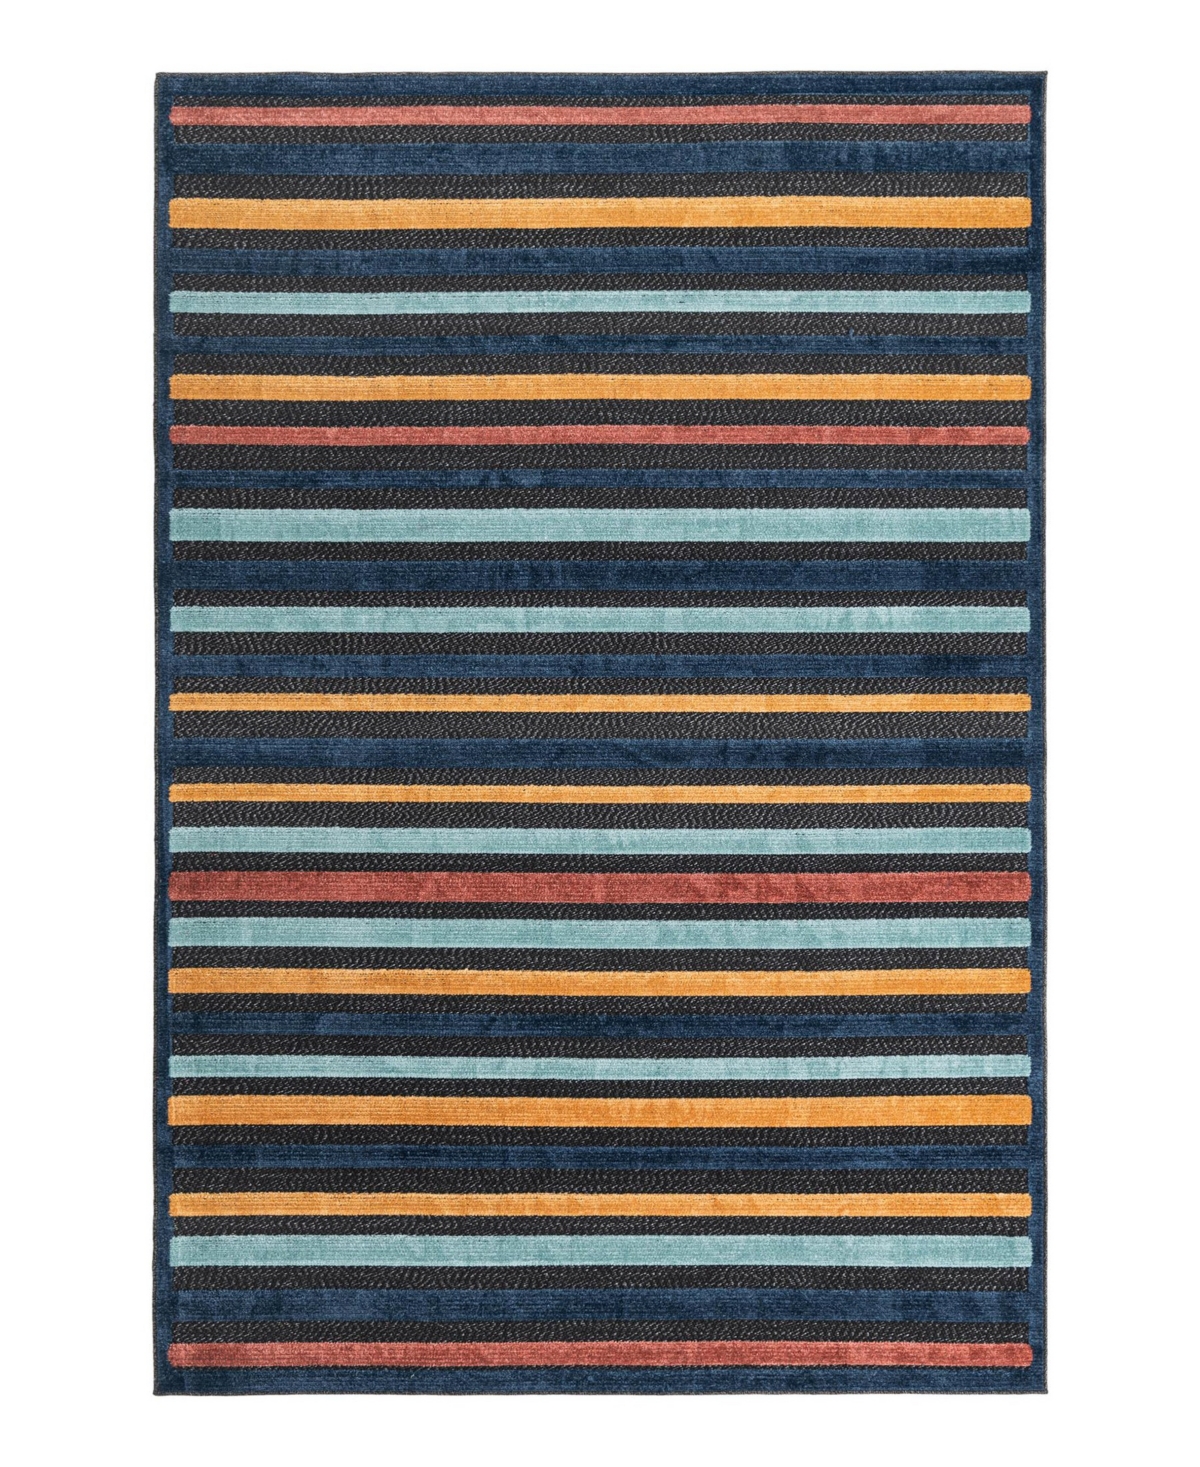 Bayshore Home Cayes Outdoor High-low Pile Cay-05 6' X 9' Area Rug In Charcoal